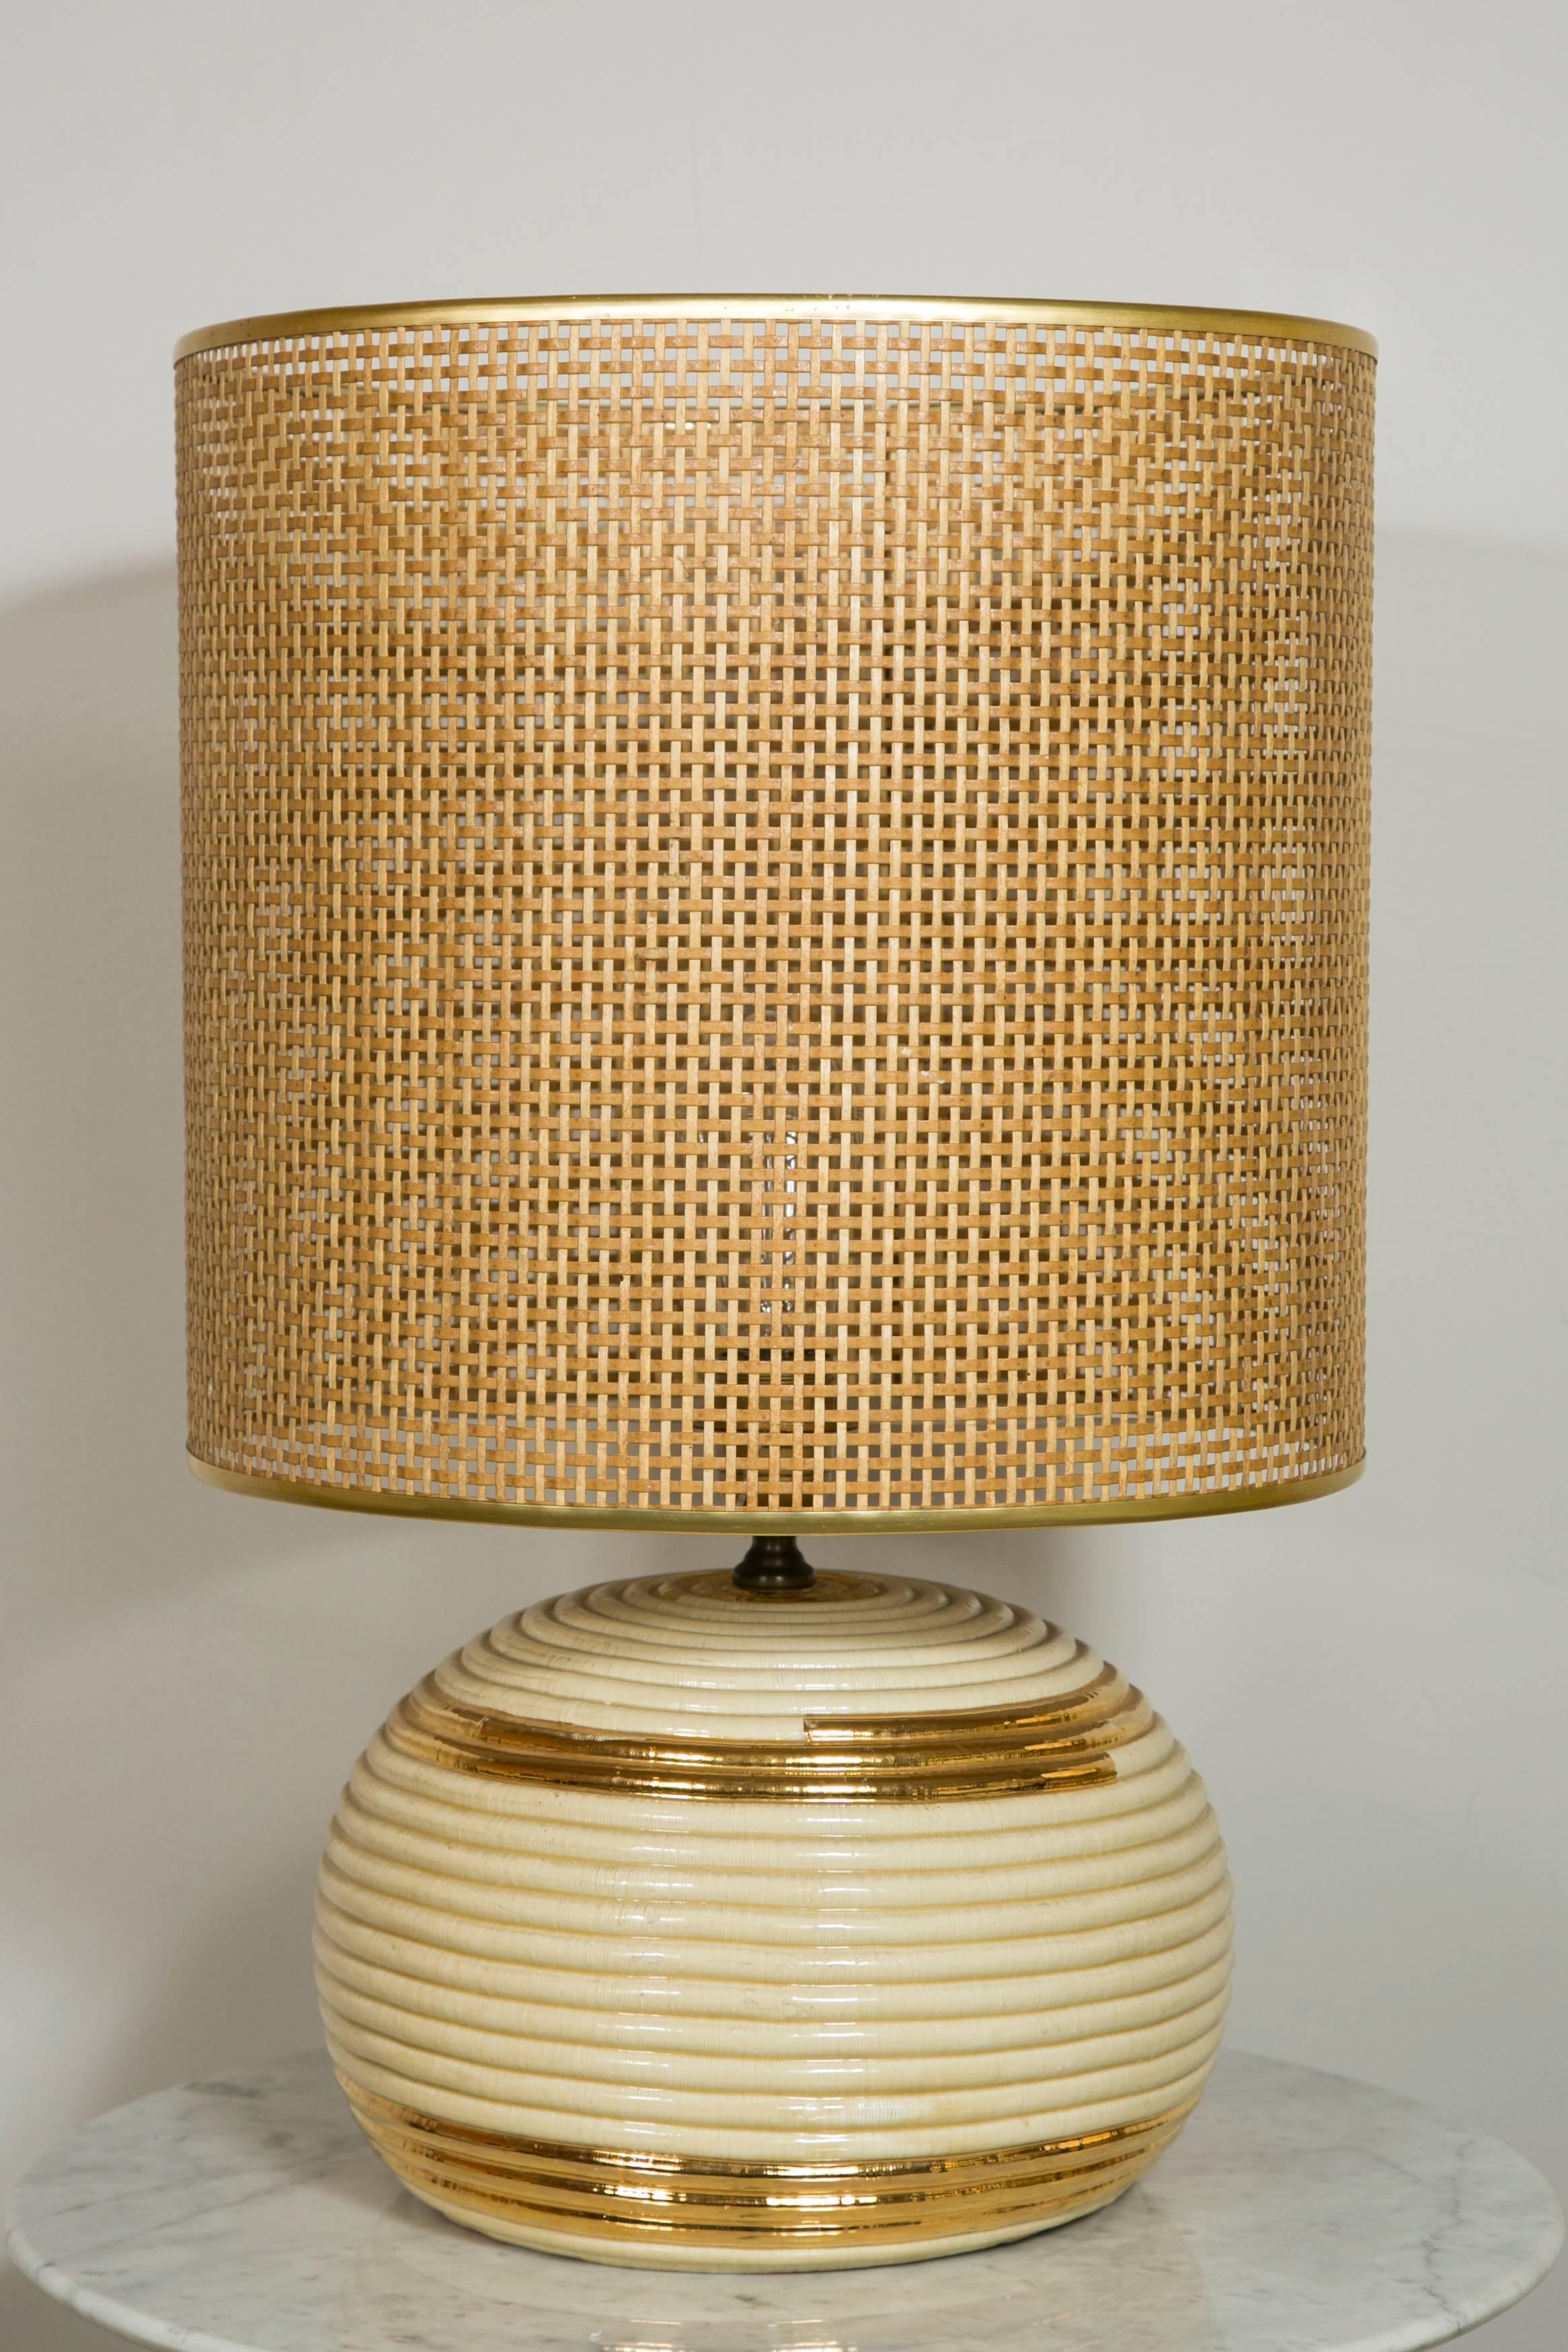 Italian Pair of White and Gold Porcelain Lamps, Cane Work Shades